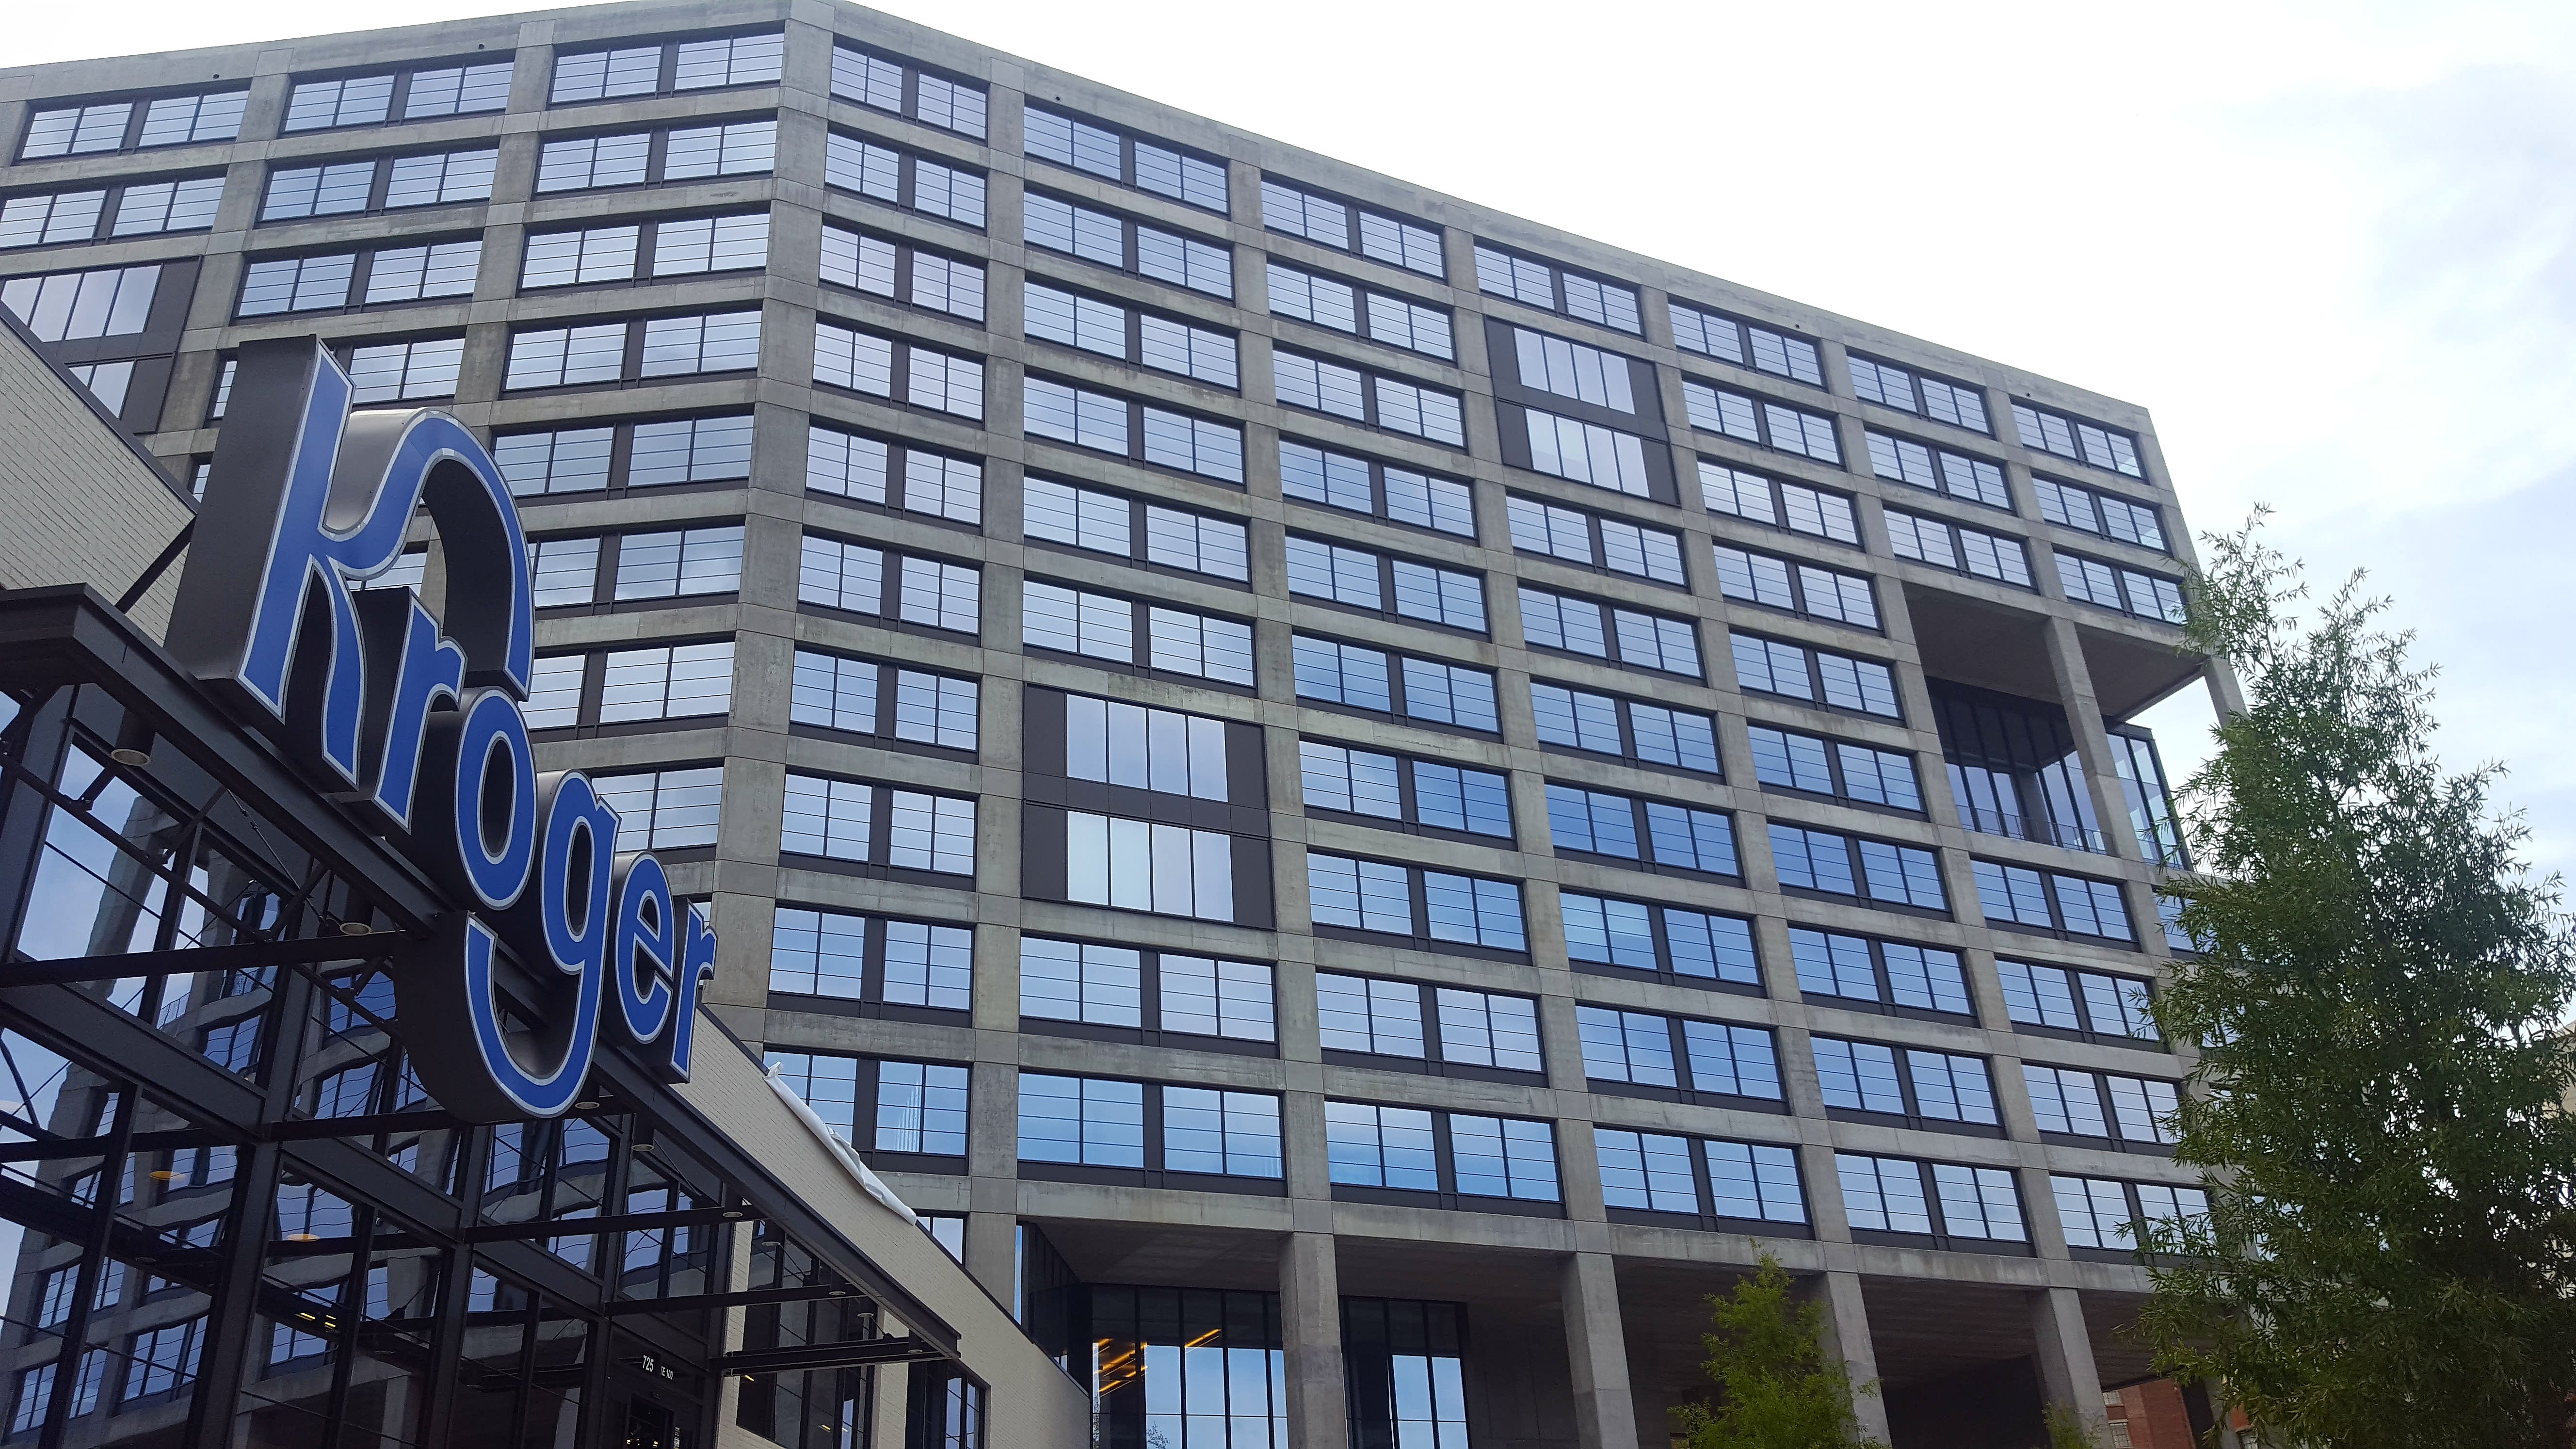 The blue Kroger logo hangs on a two-story building beneath a large, glassy office building.